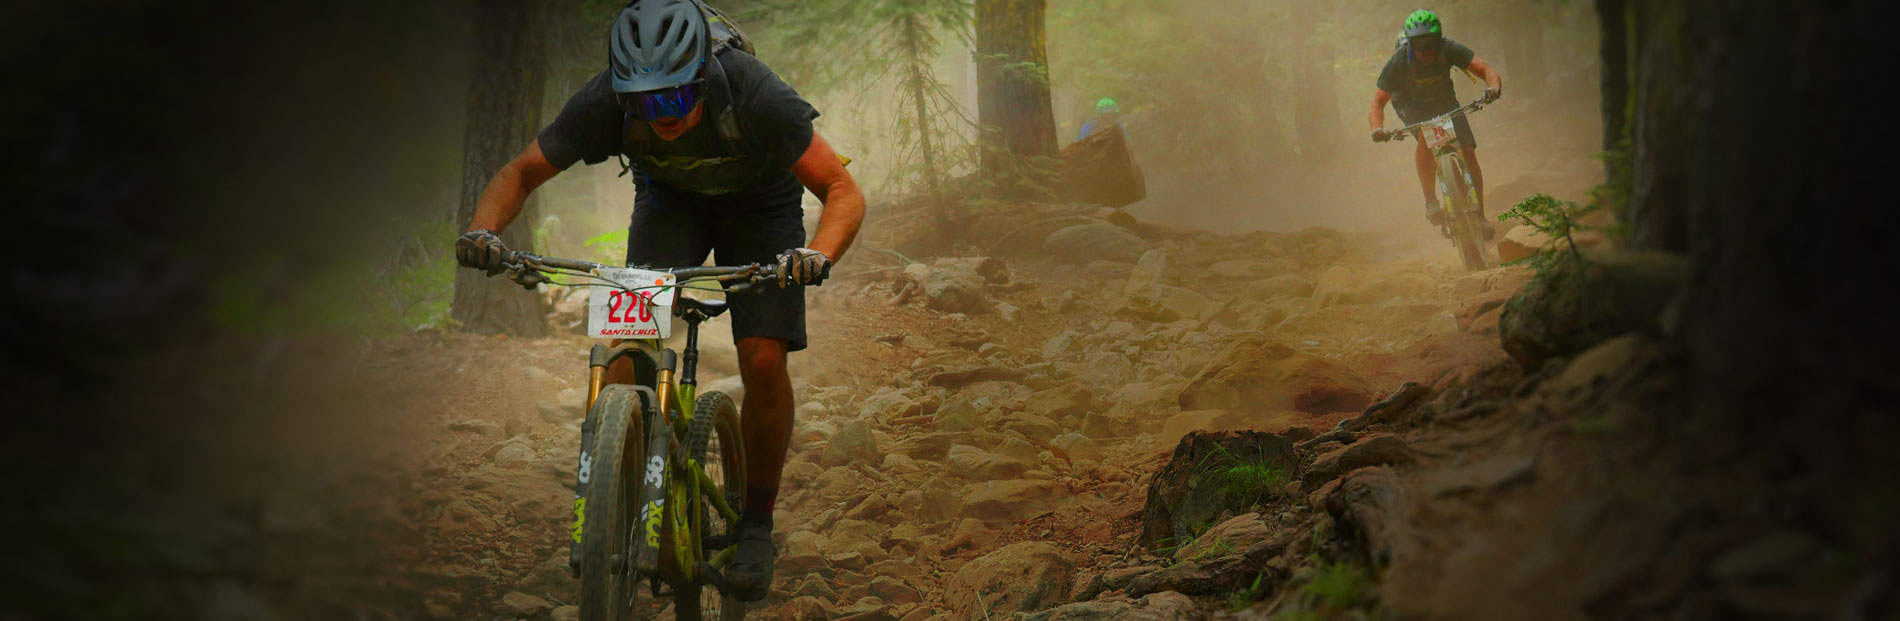 Mountain bike racer riding rocks at the Downieville Classic